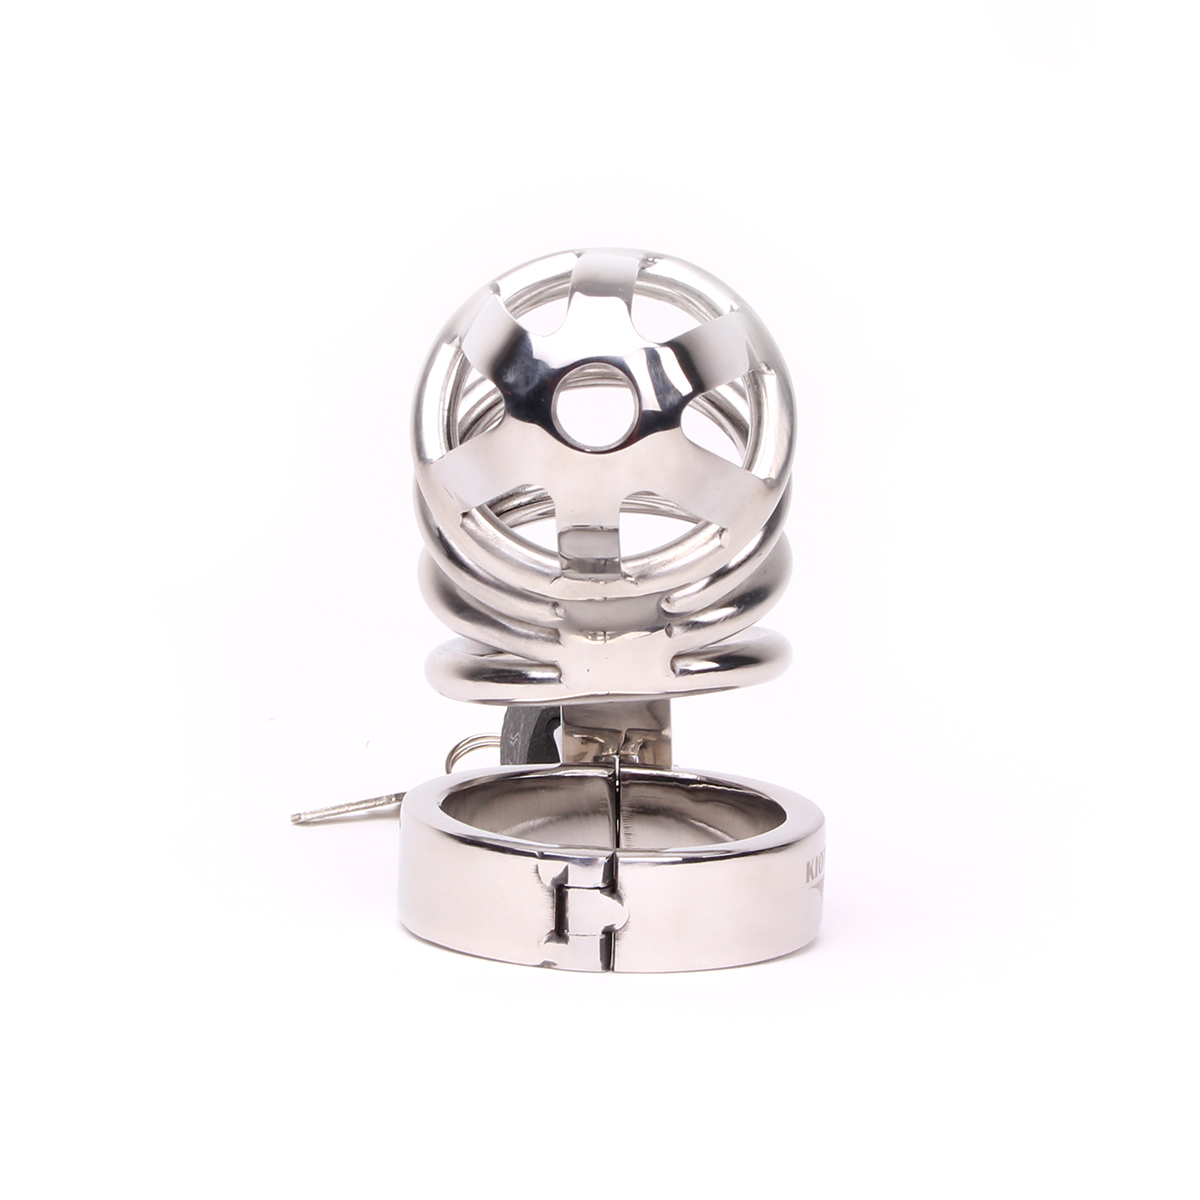 Chastity-Cage-Large-Steel-OPR-277031-2